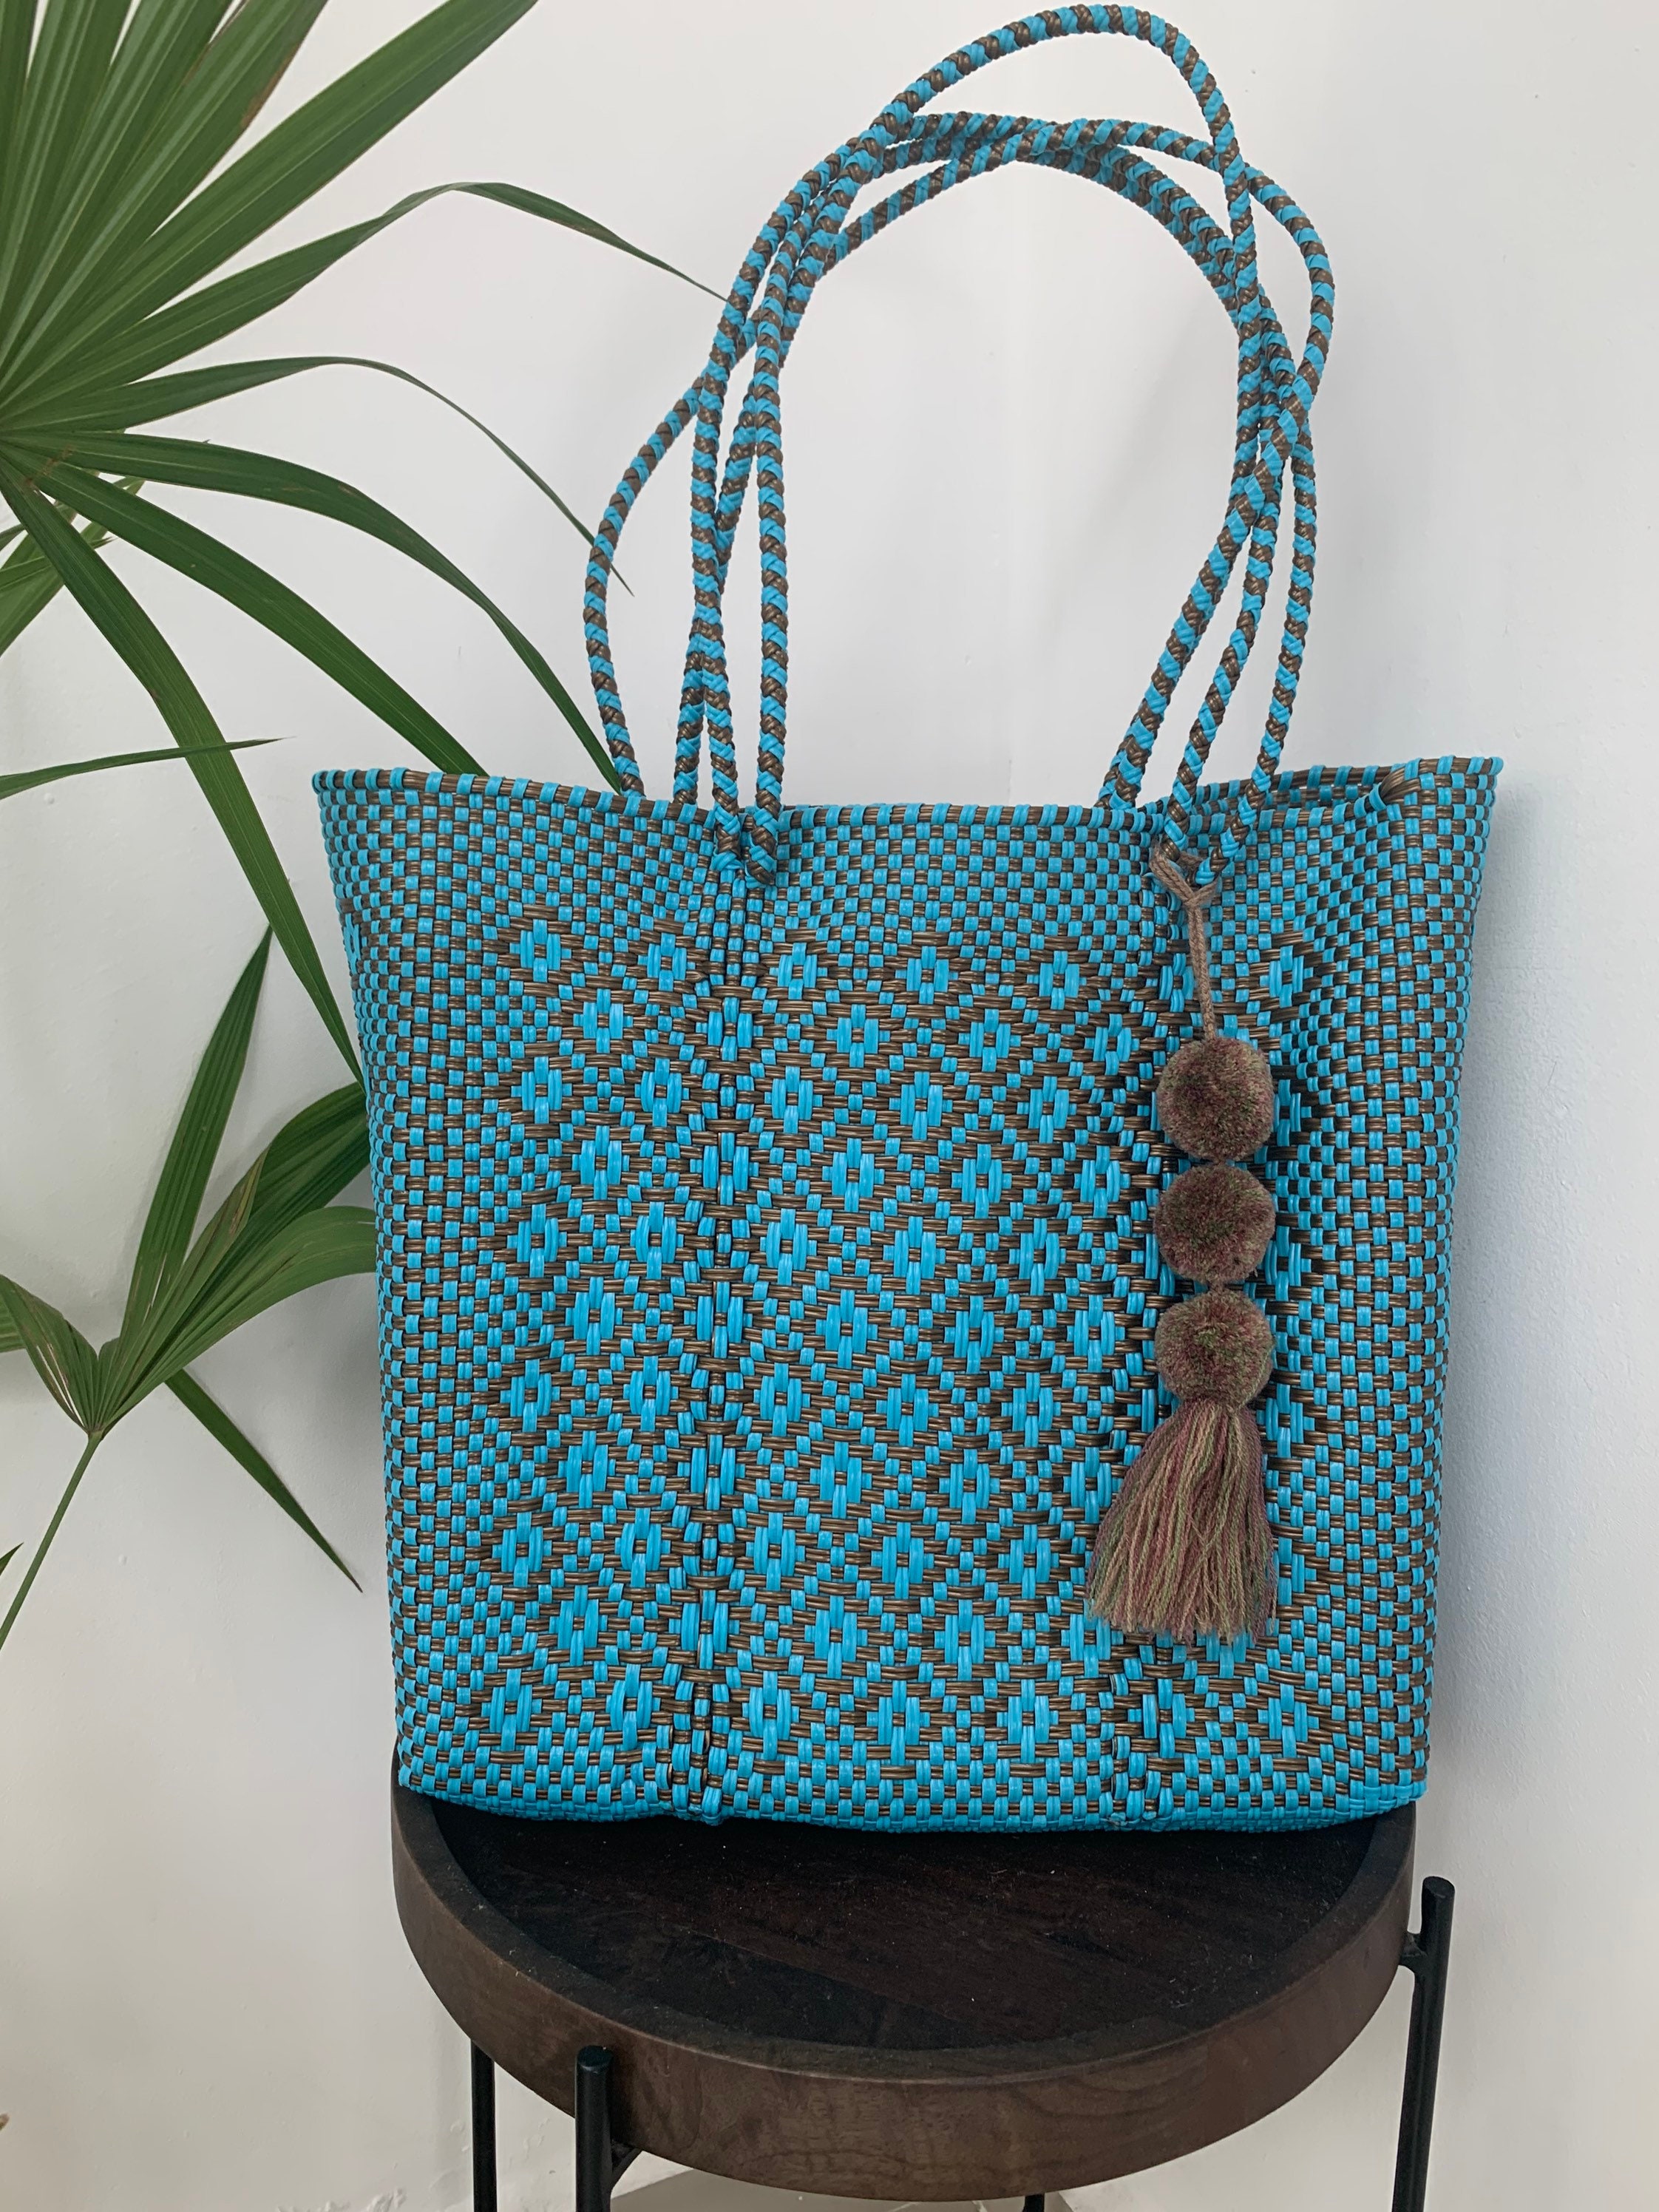 11 - Trendy eco-friendly bags made from recycled materials - Ecofriend